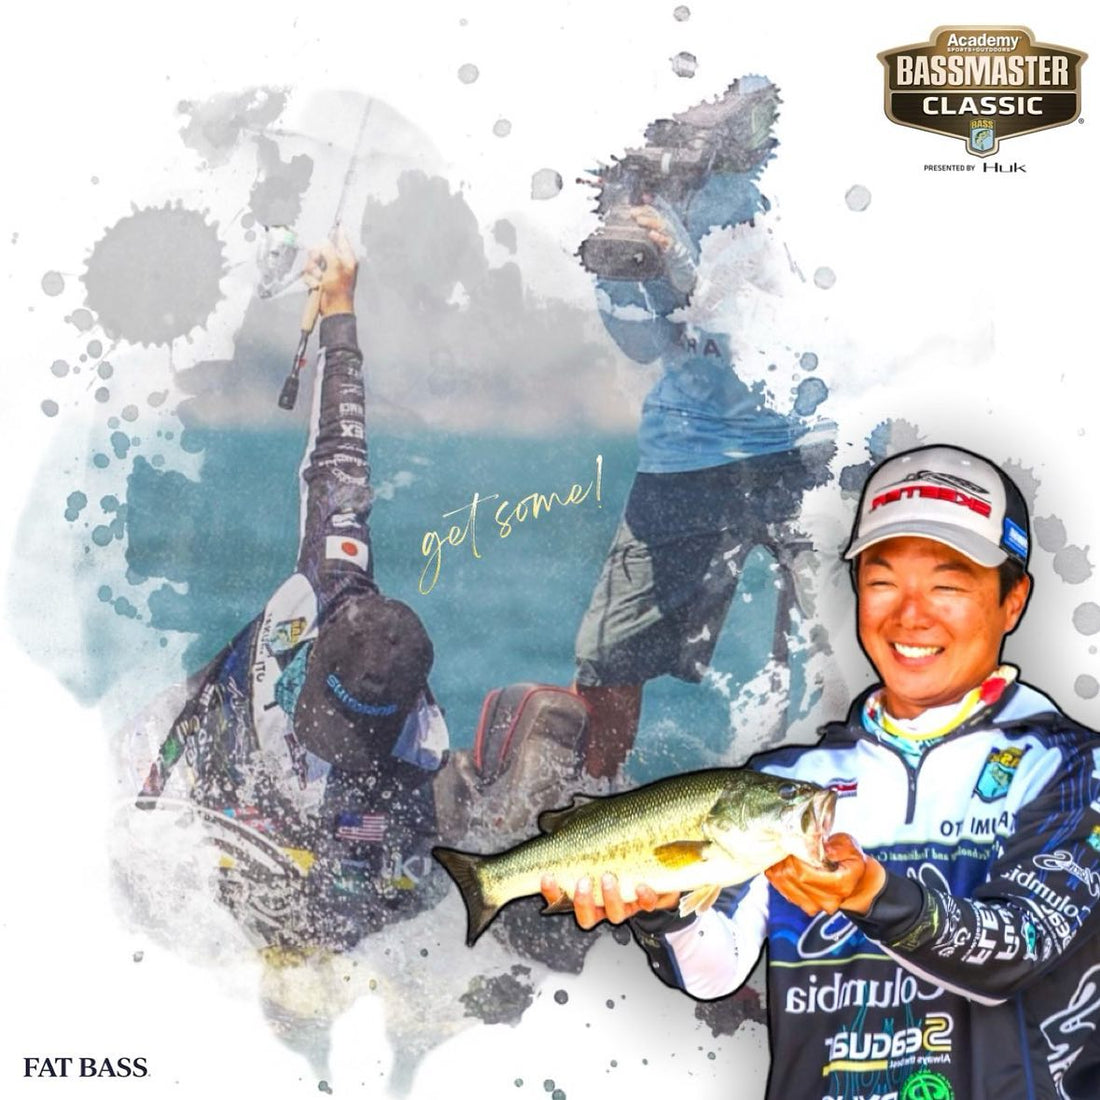 It’s the start of the Bassmaster Classic!